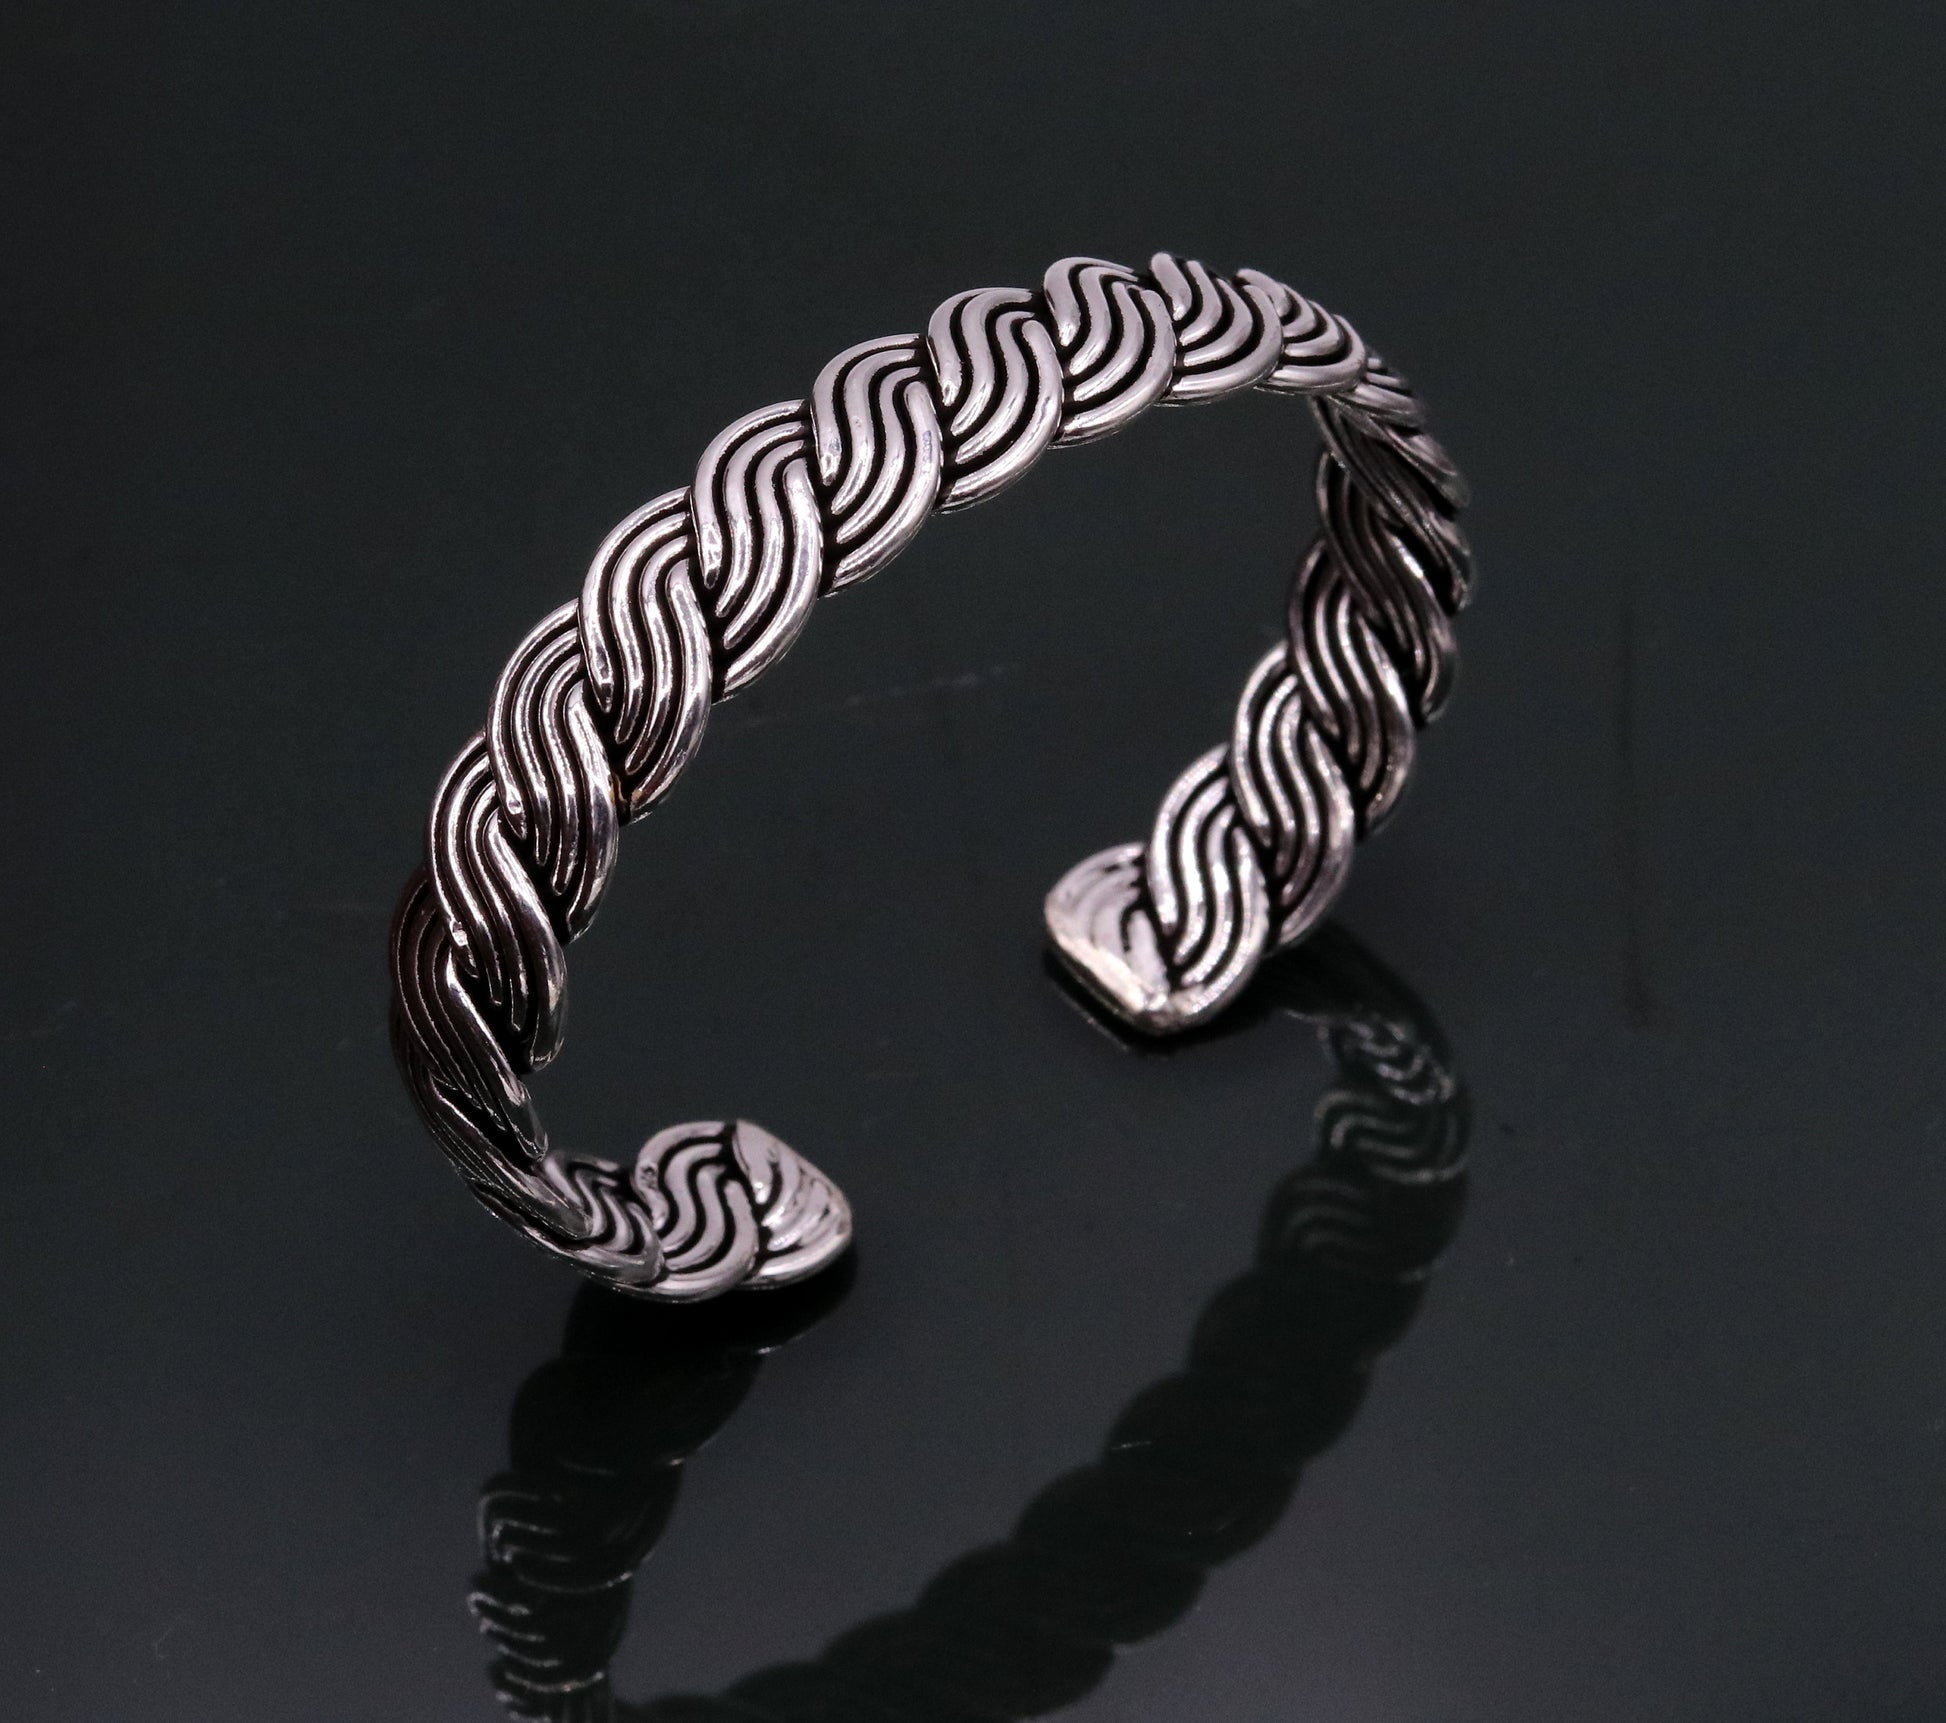 925 sterling silver handmade twisted design fabulous open face adjustable bangle cuff bracelet kada, excellent gifting jewelry her nsk214 - TRIBAL ORNAMENTS